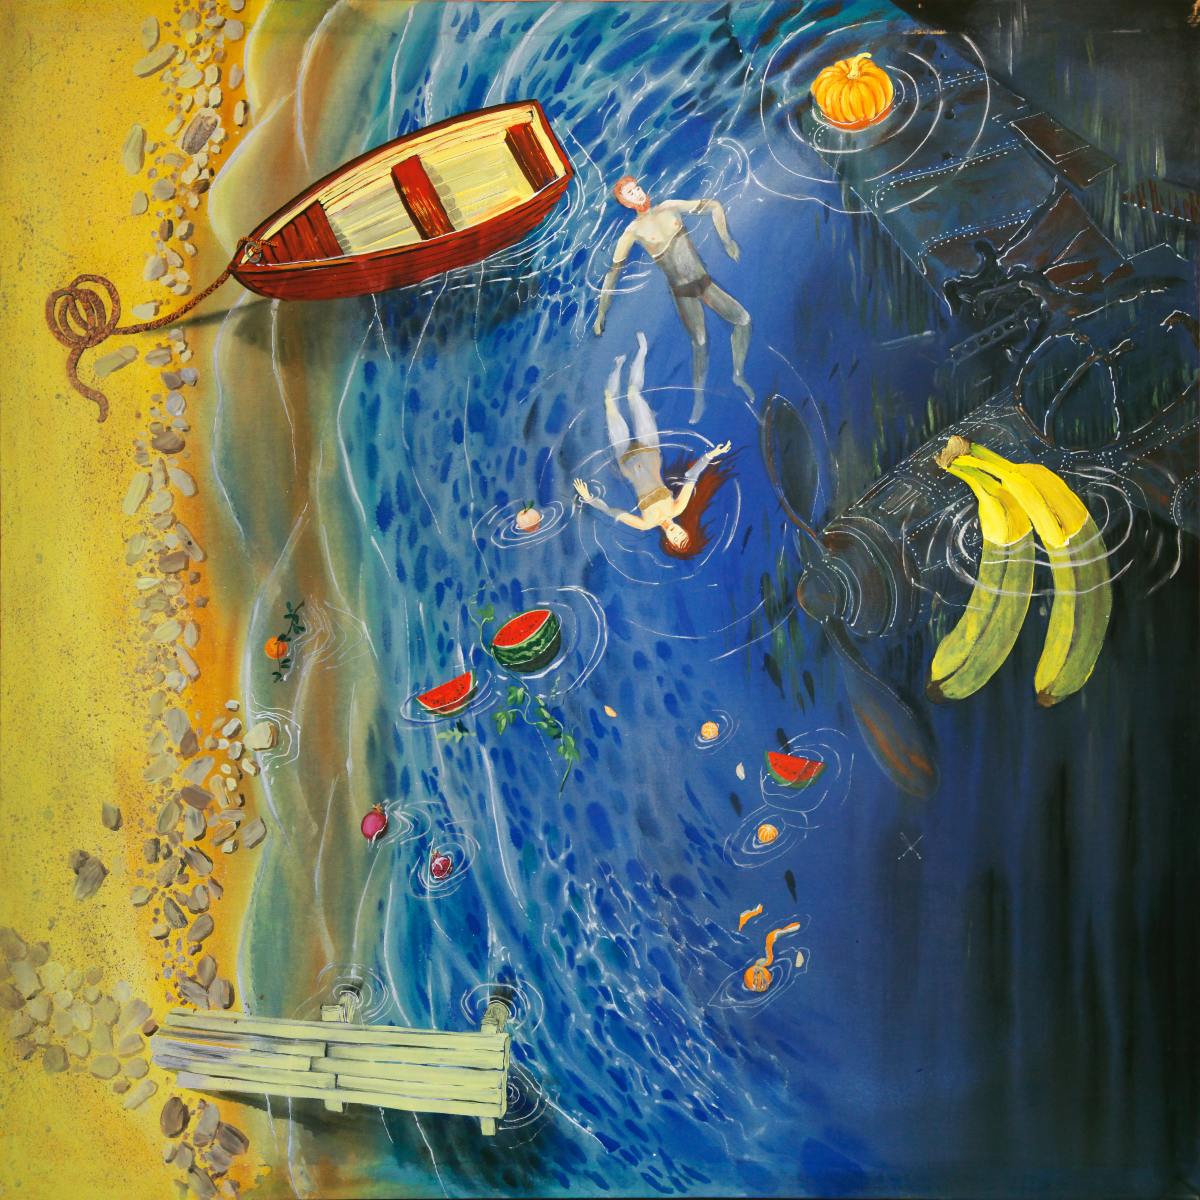 Try a surrealist painting!